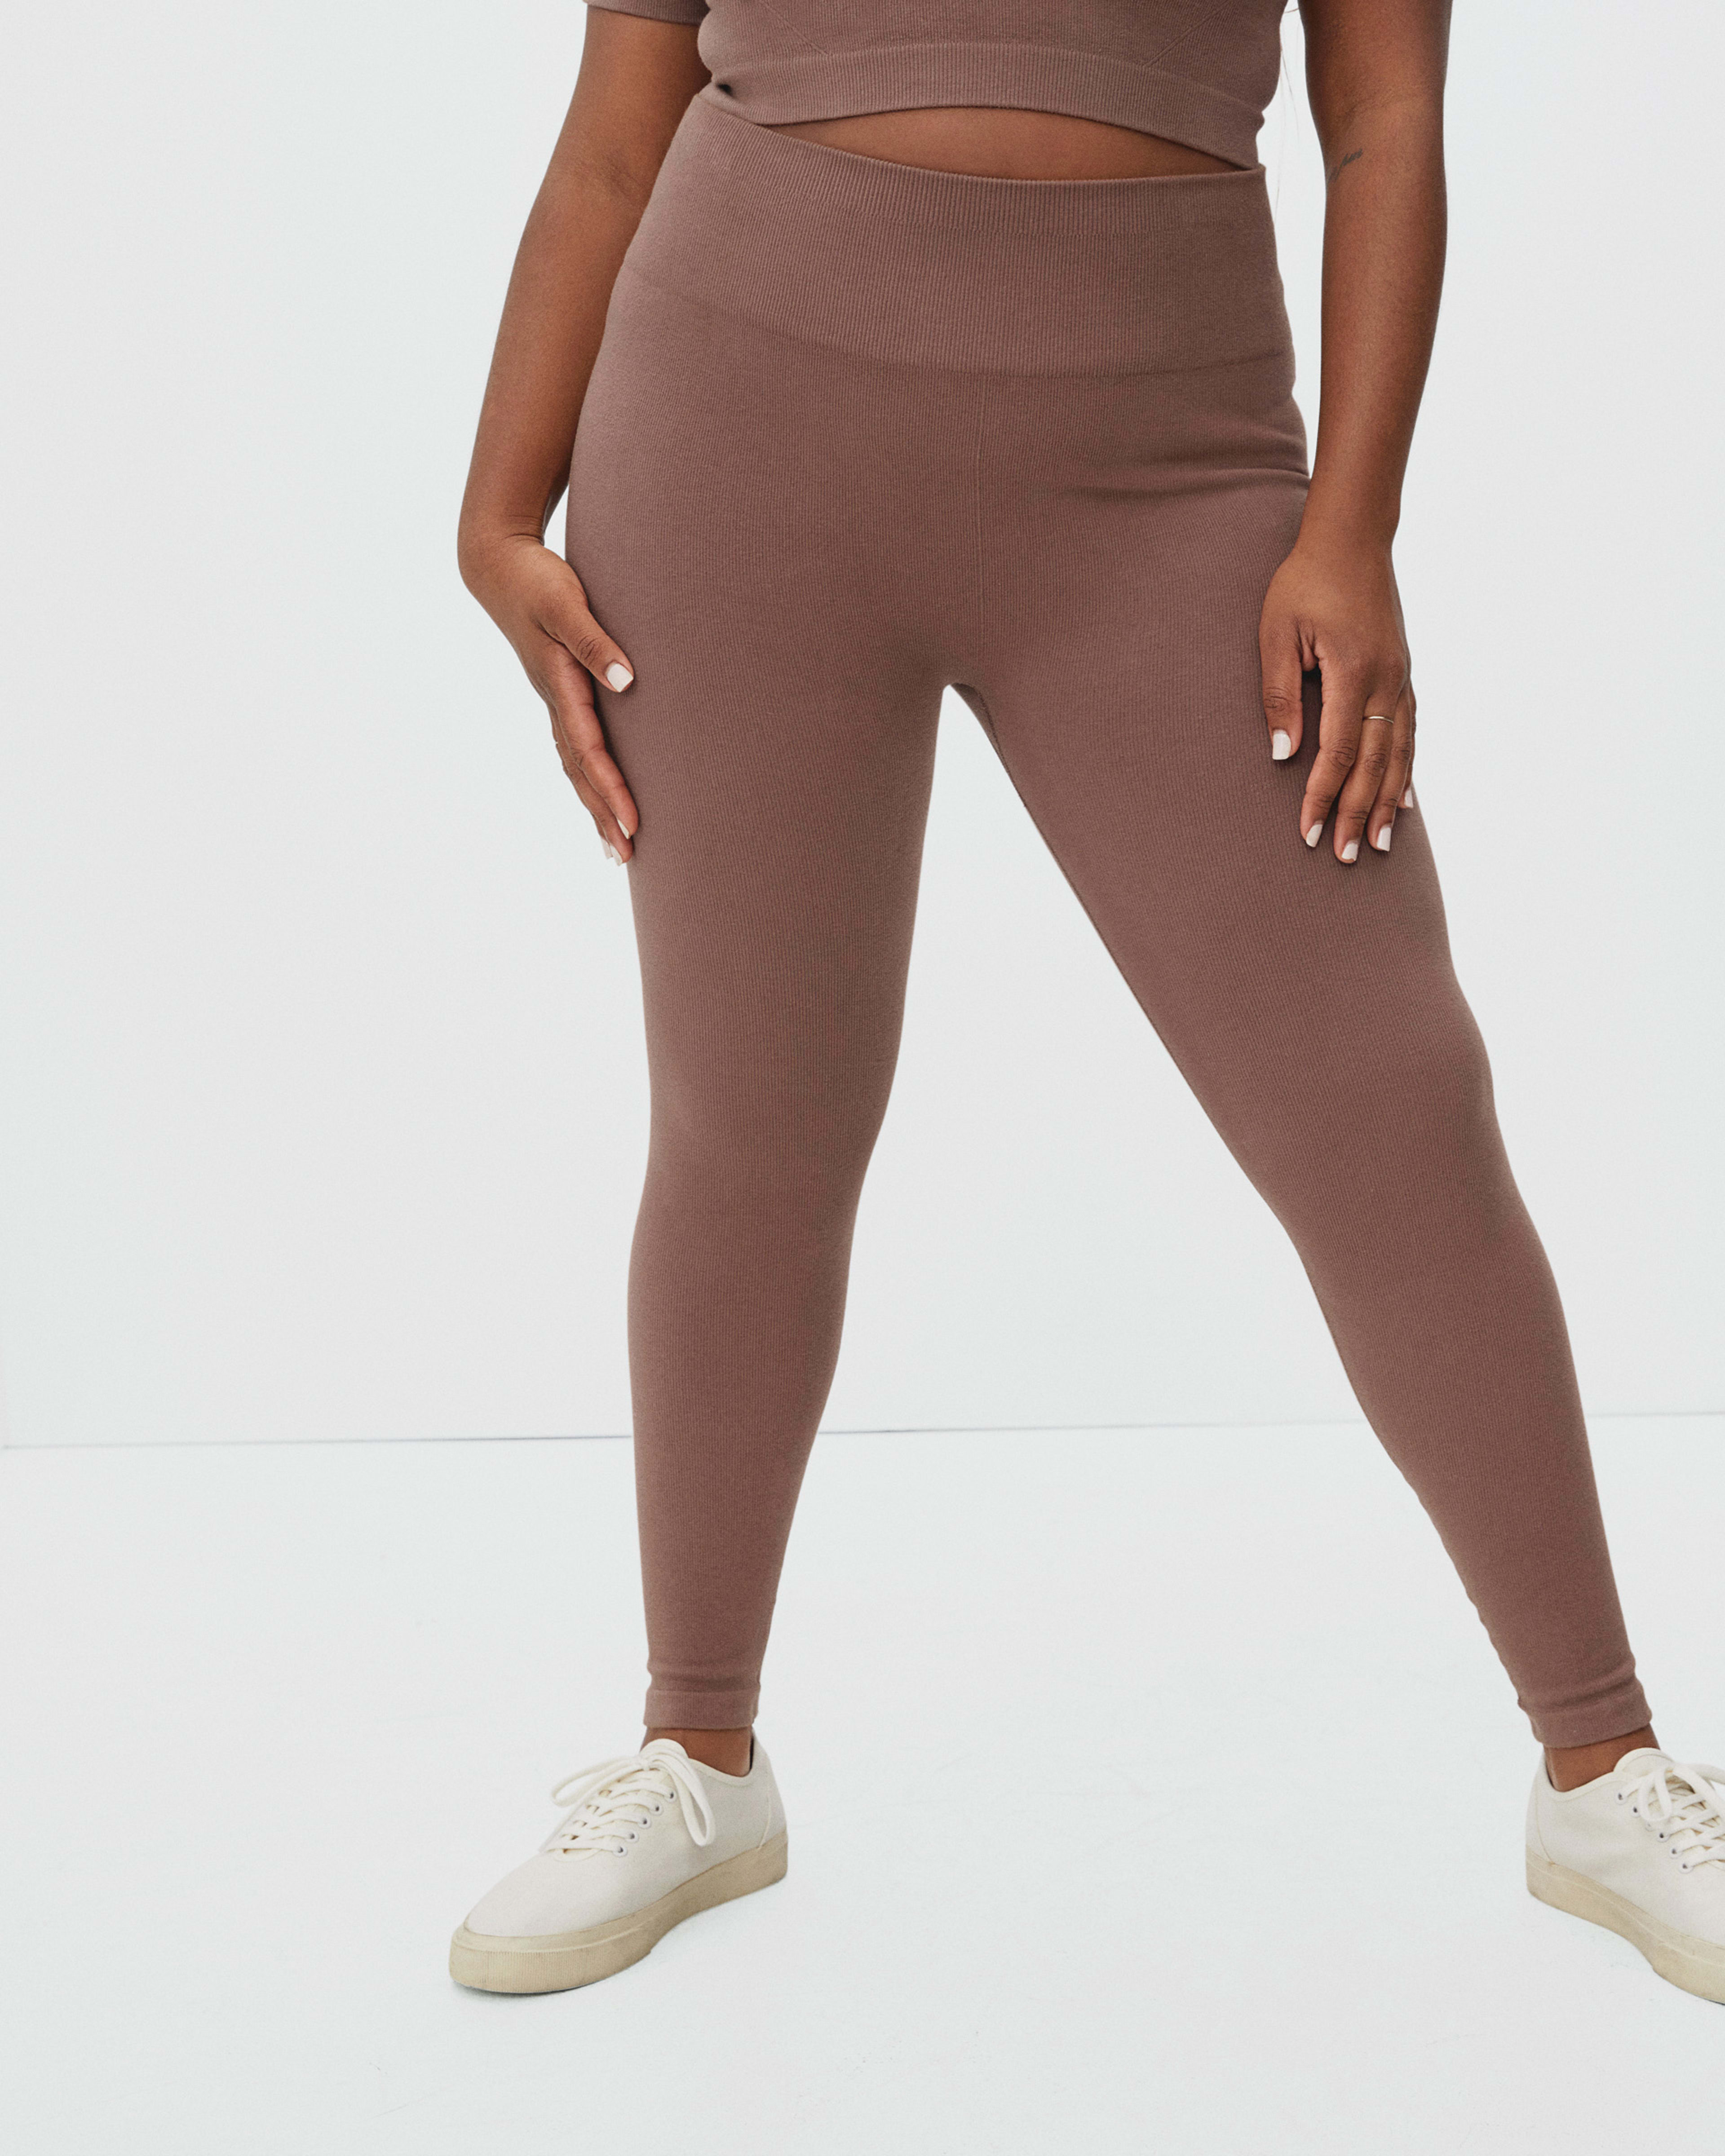 Women's Ribbed High Waist Legging made with Organic Cotton